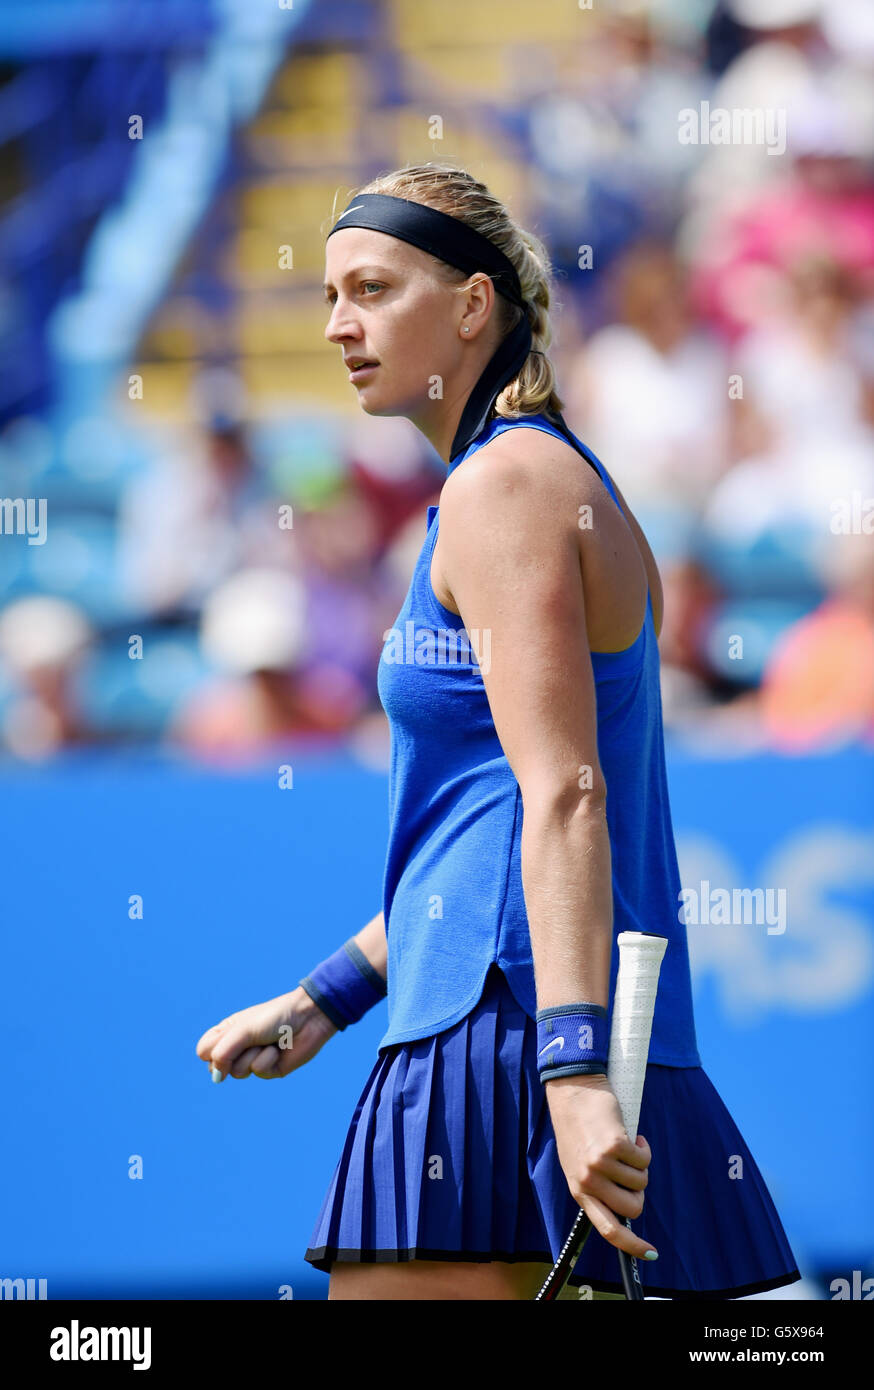 Editorial Use Only - Petra Kvitova of the Czech Republic reacts after winning a point against Timea Babos of Hungary at the Aegon International tennis tournament at Devonshire Park  in Eastbourne. June 21, 2016. Simon  Dack / Telephoto Images Stock Photo